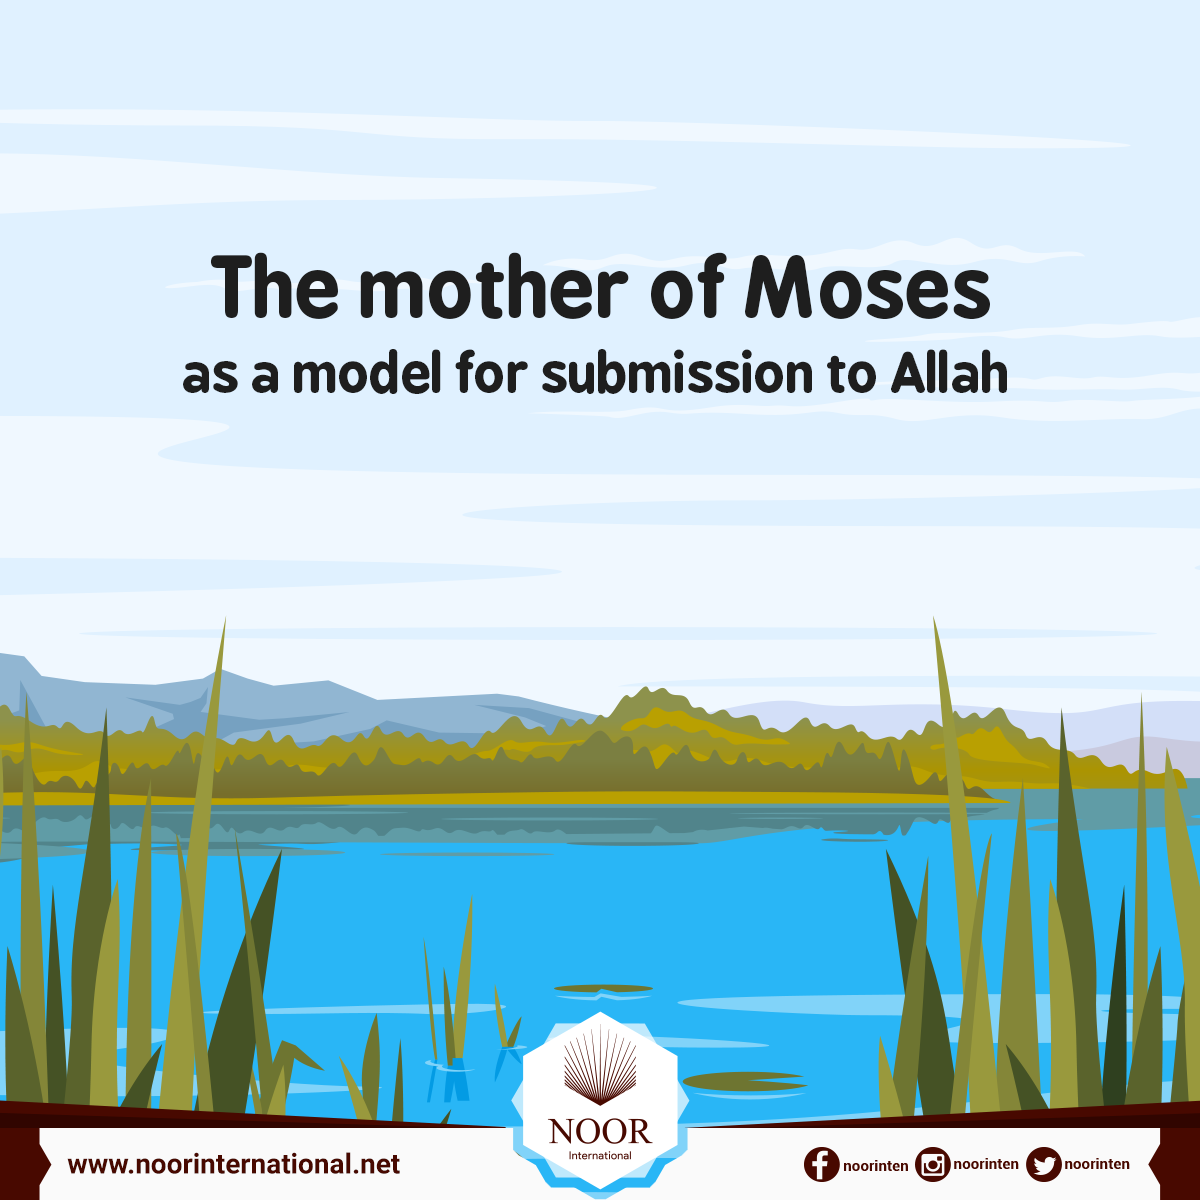 The mother of Moses as a model for submission to Allah